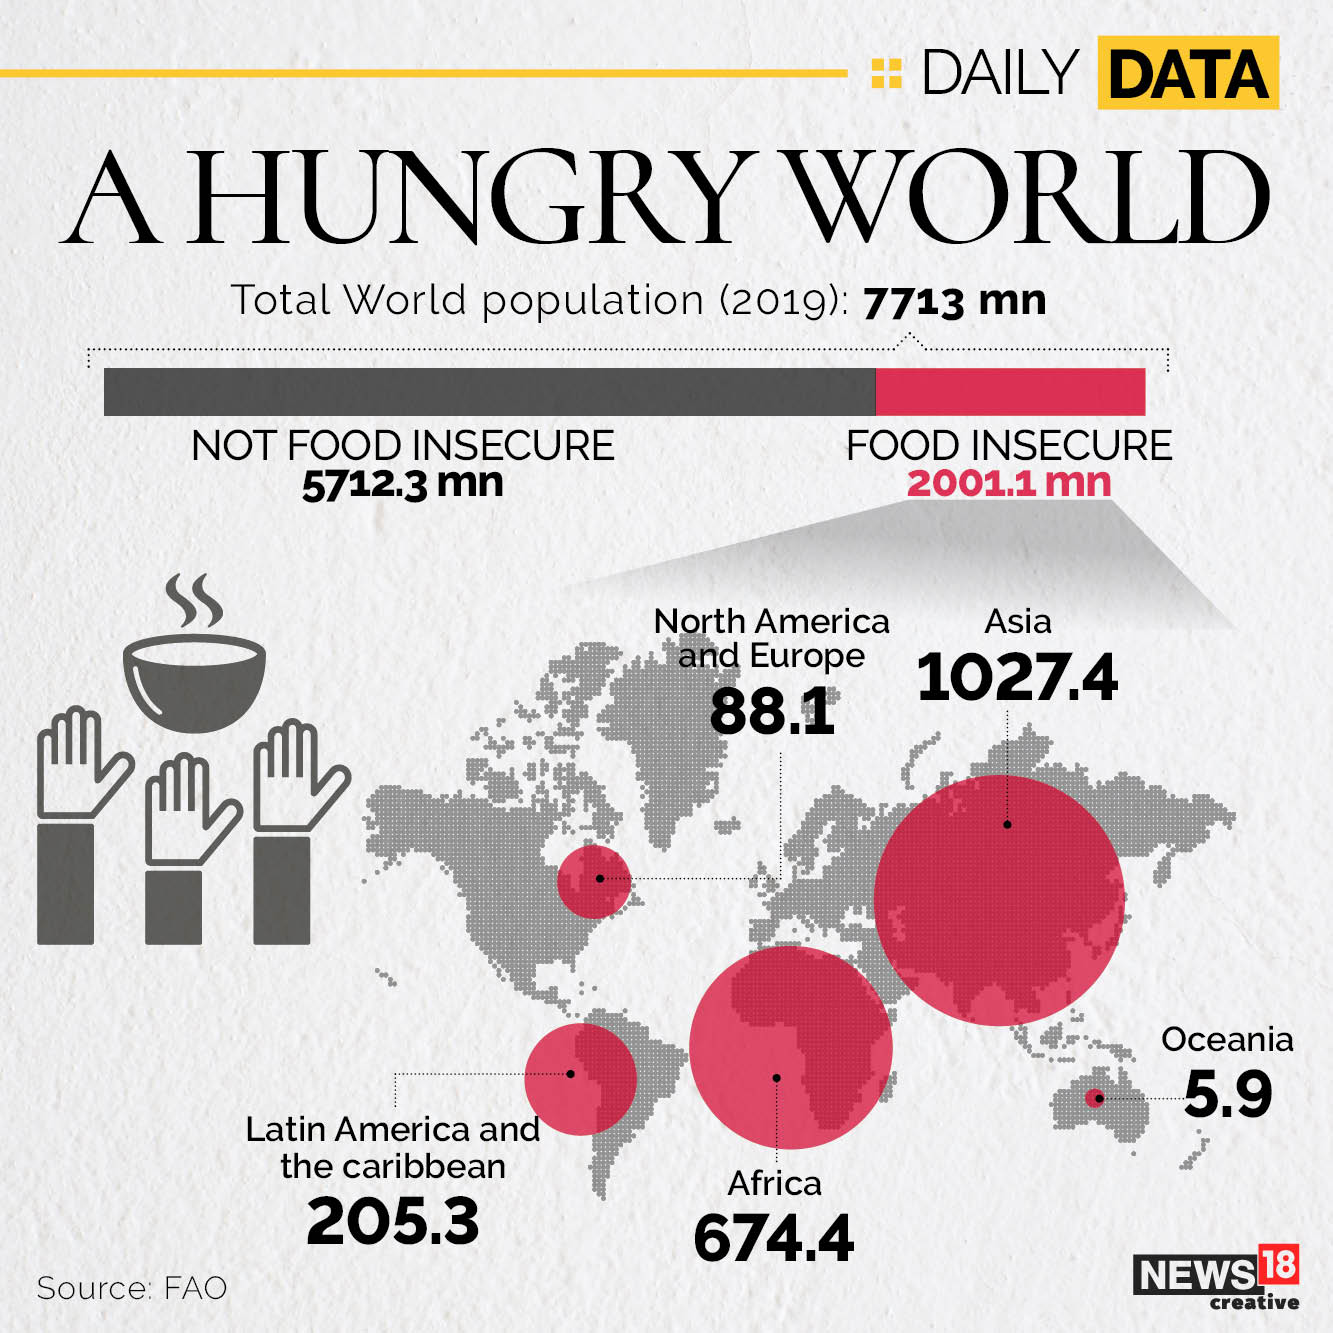 Globally, 2 billion people don't know if they will get their next meal